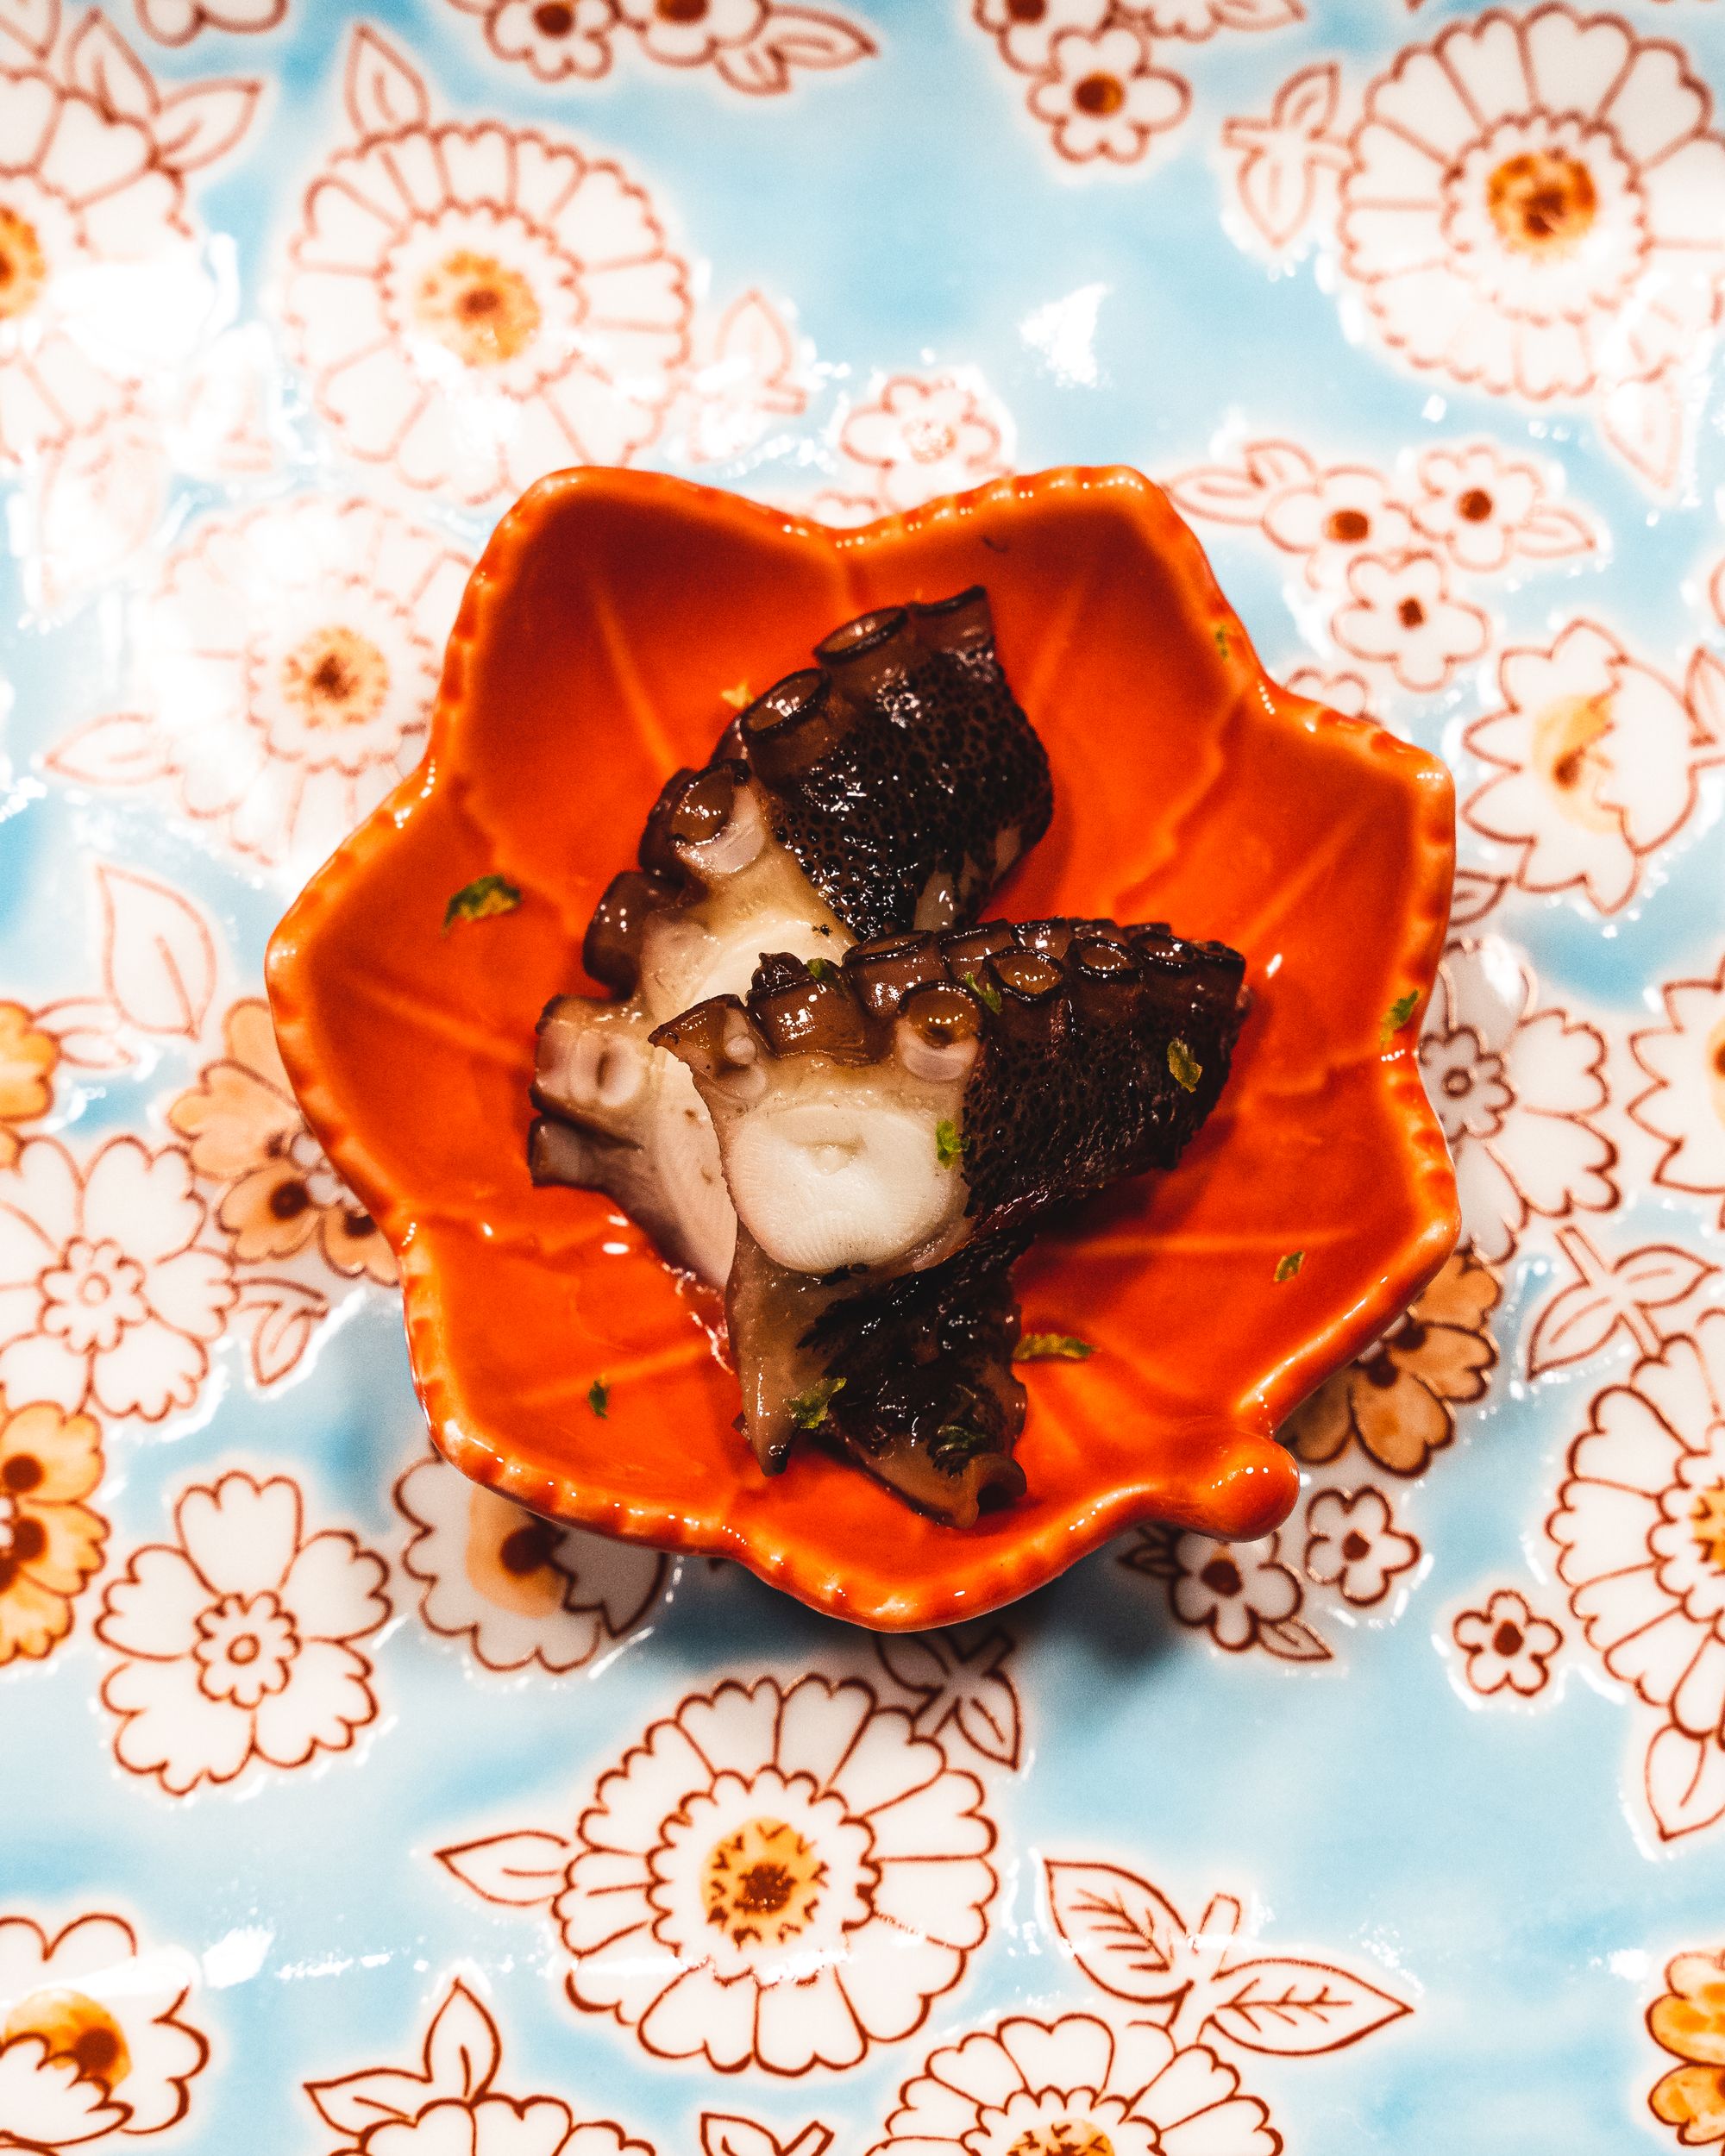 Octopus on a red leaf shaped plate